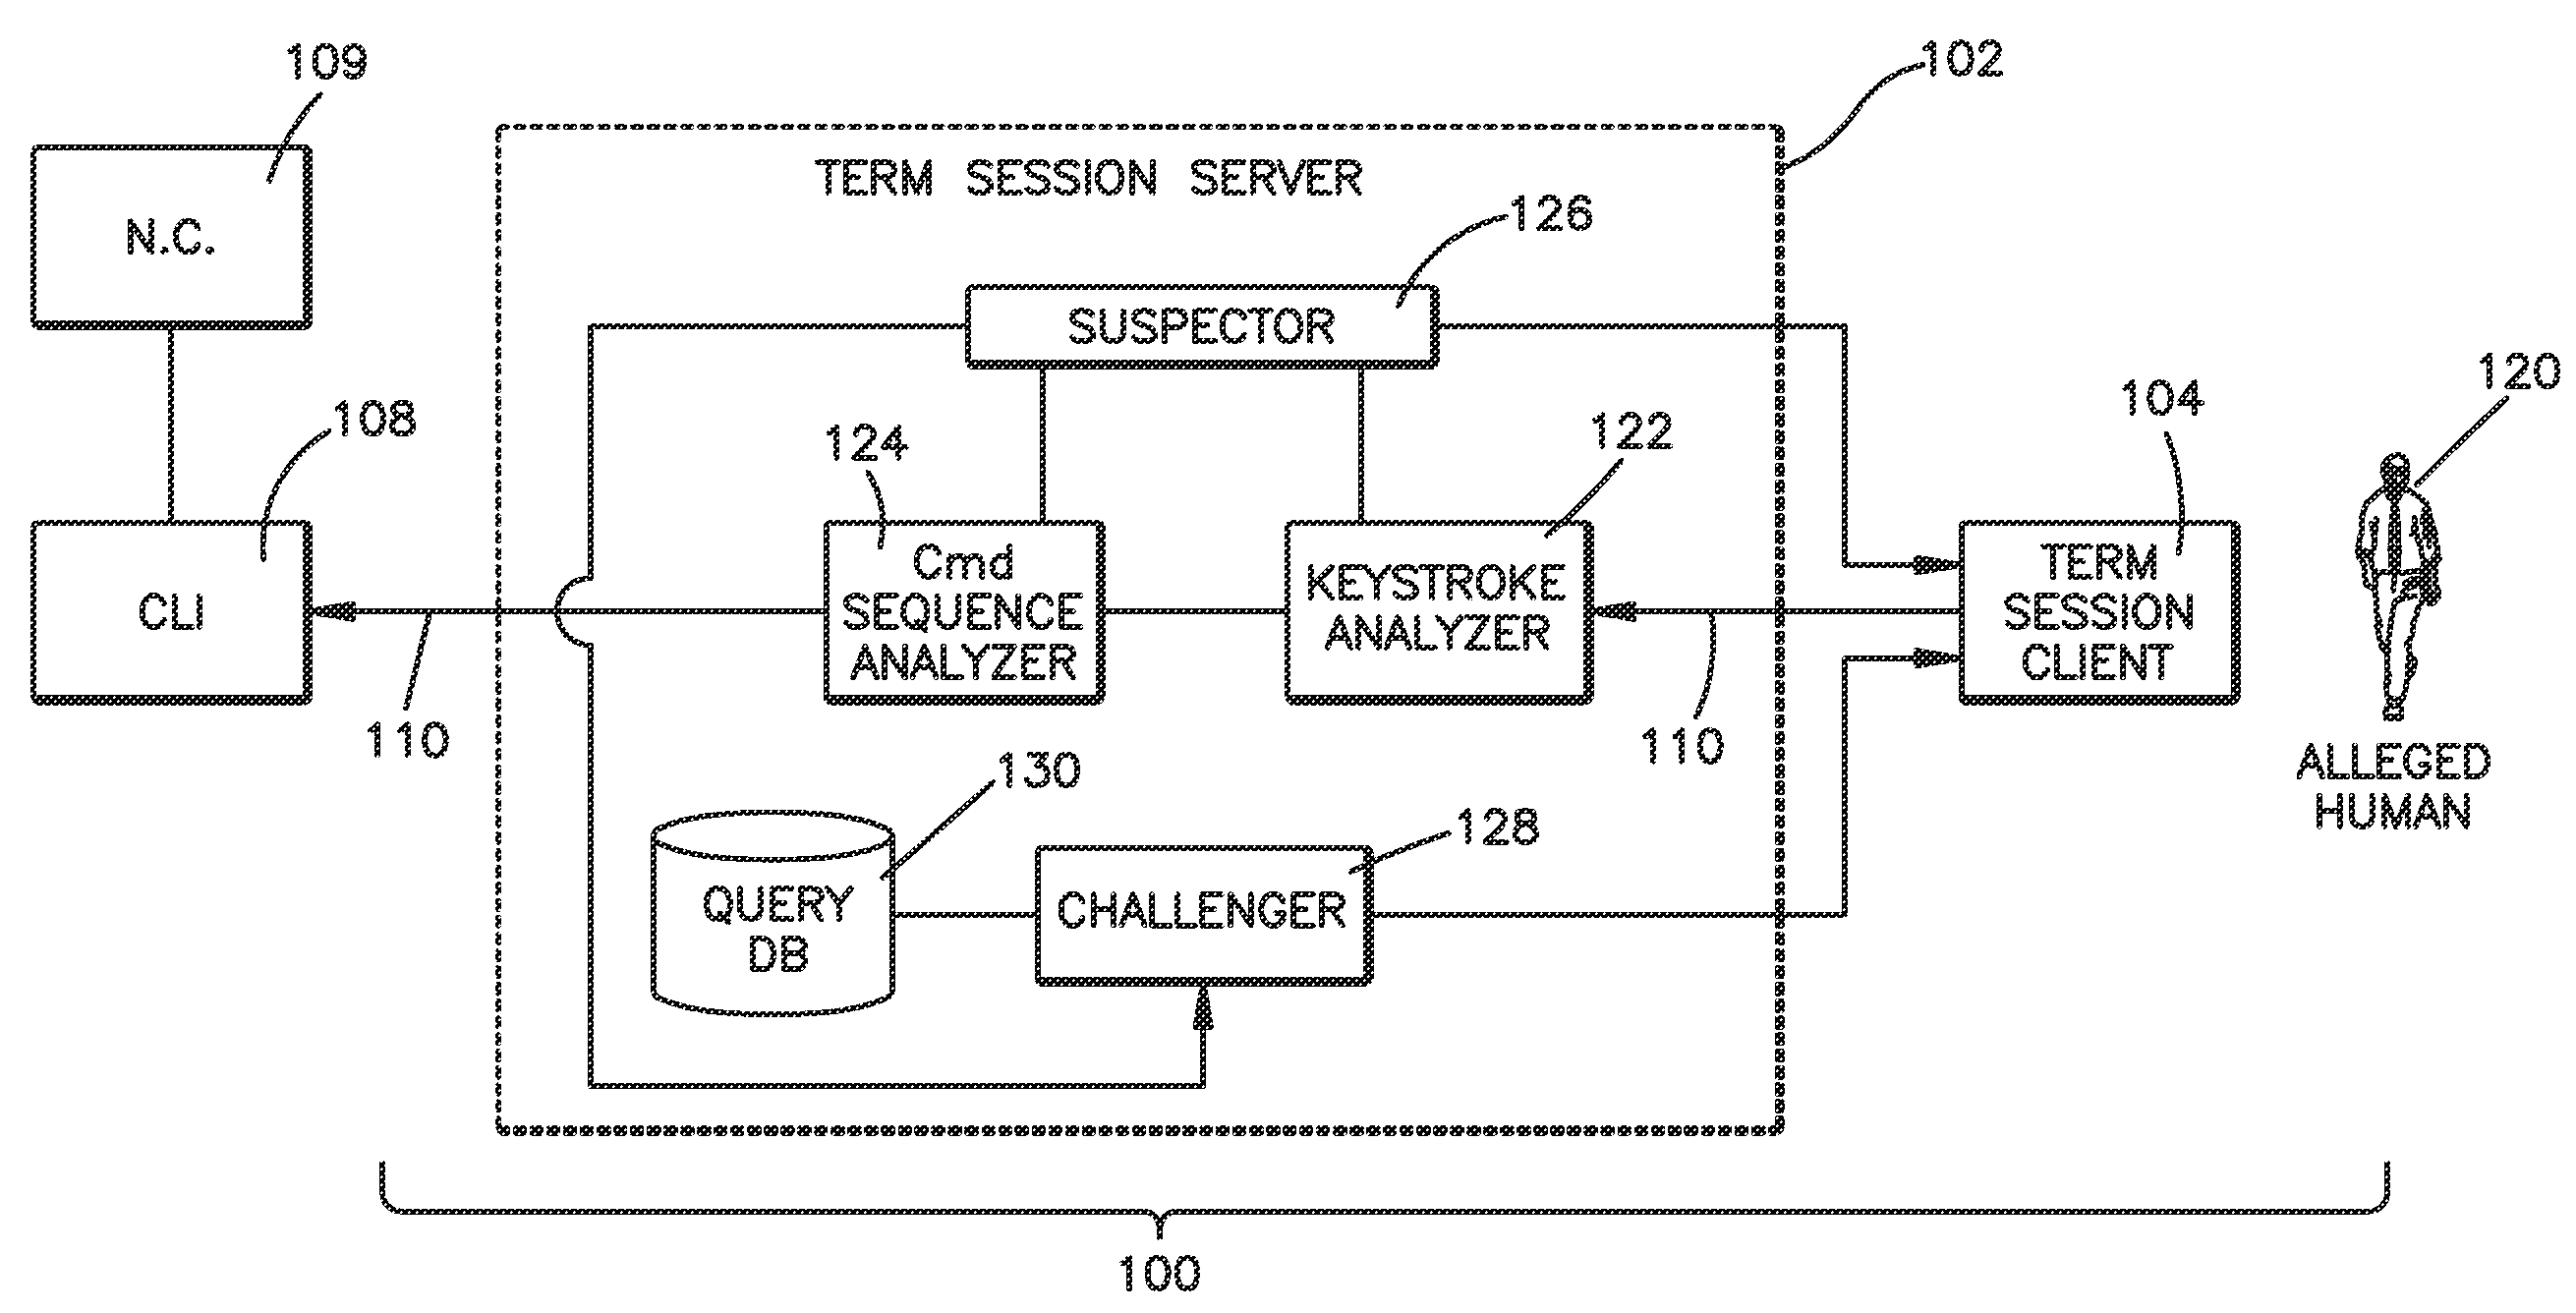 Method and system for validating active computer terminal sessions